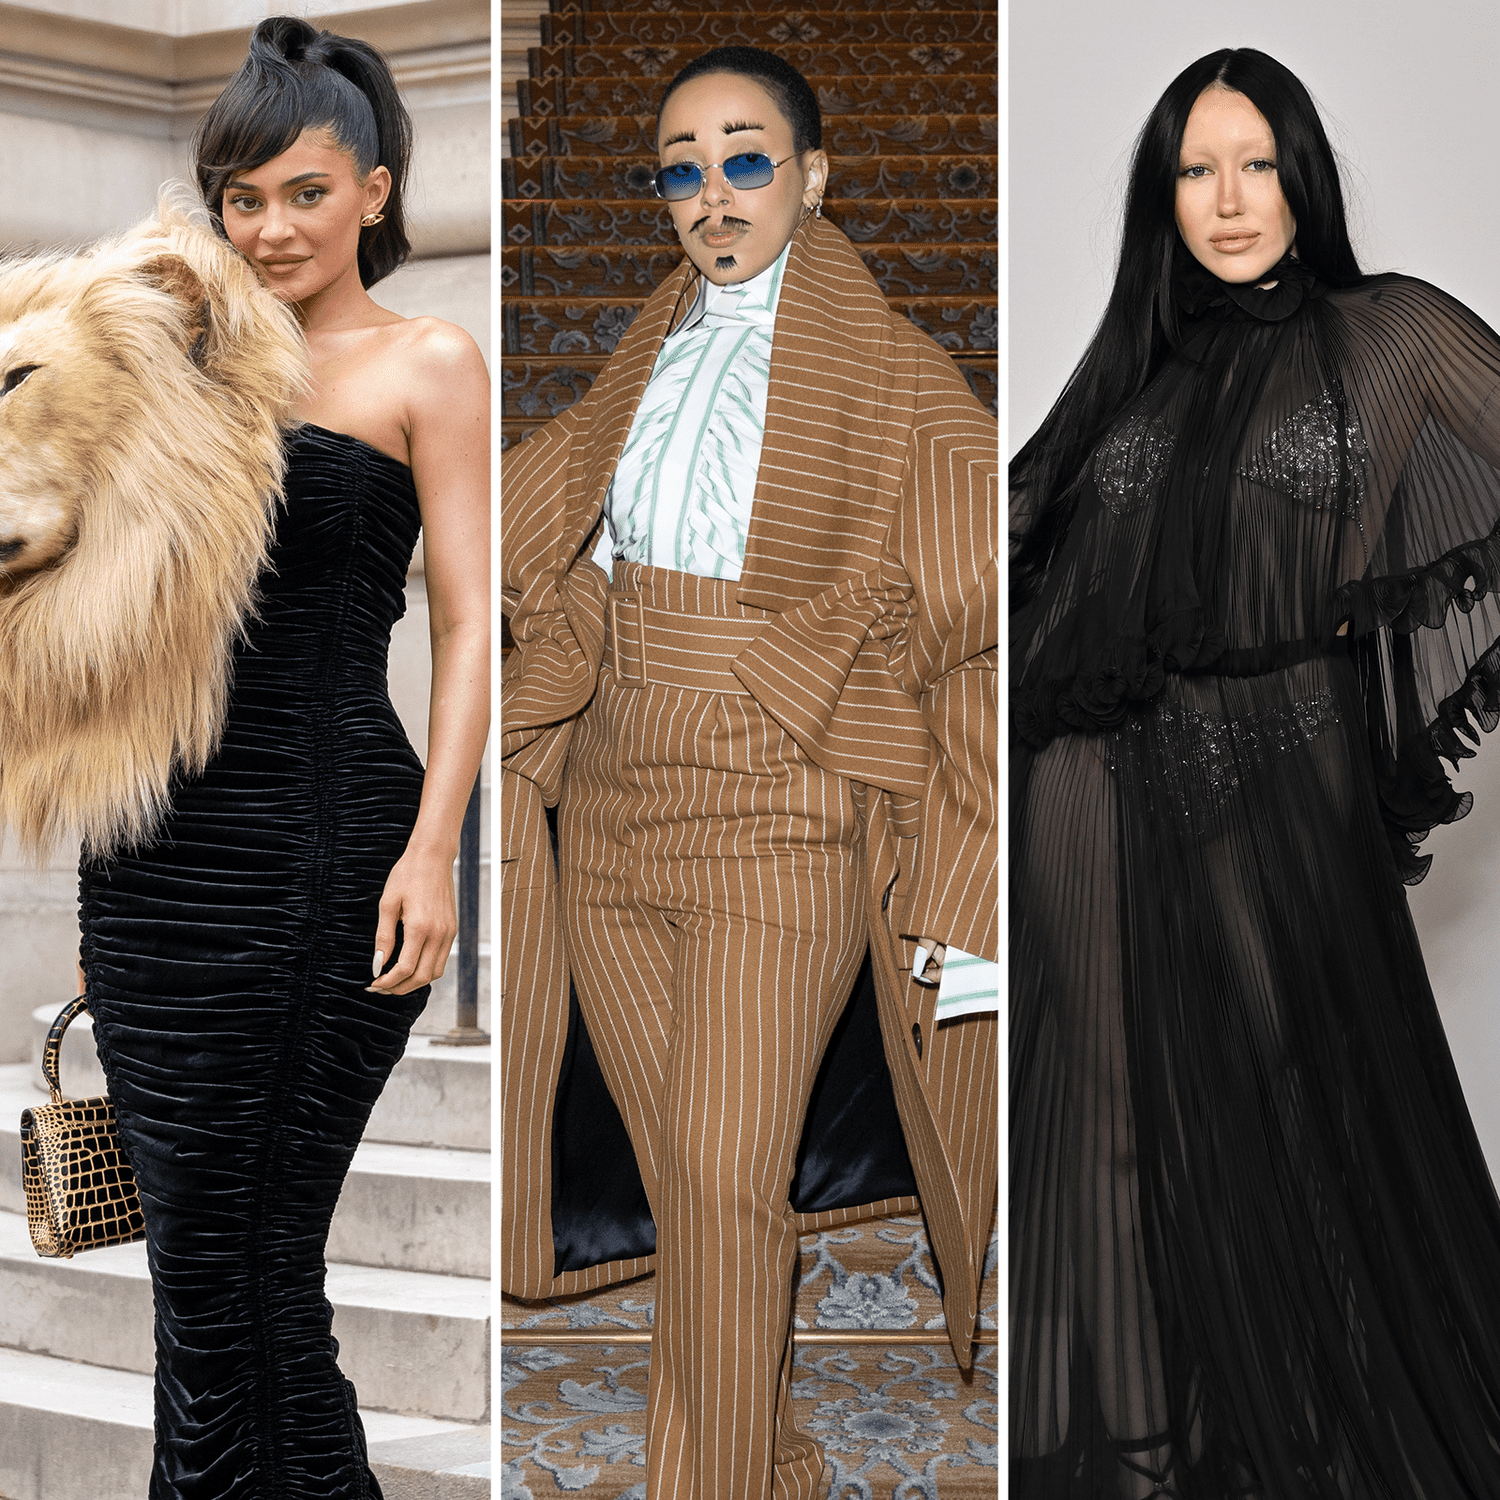 7 of the Most Memorable Celeb Looks at Paris Fashion Week